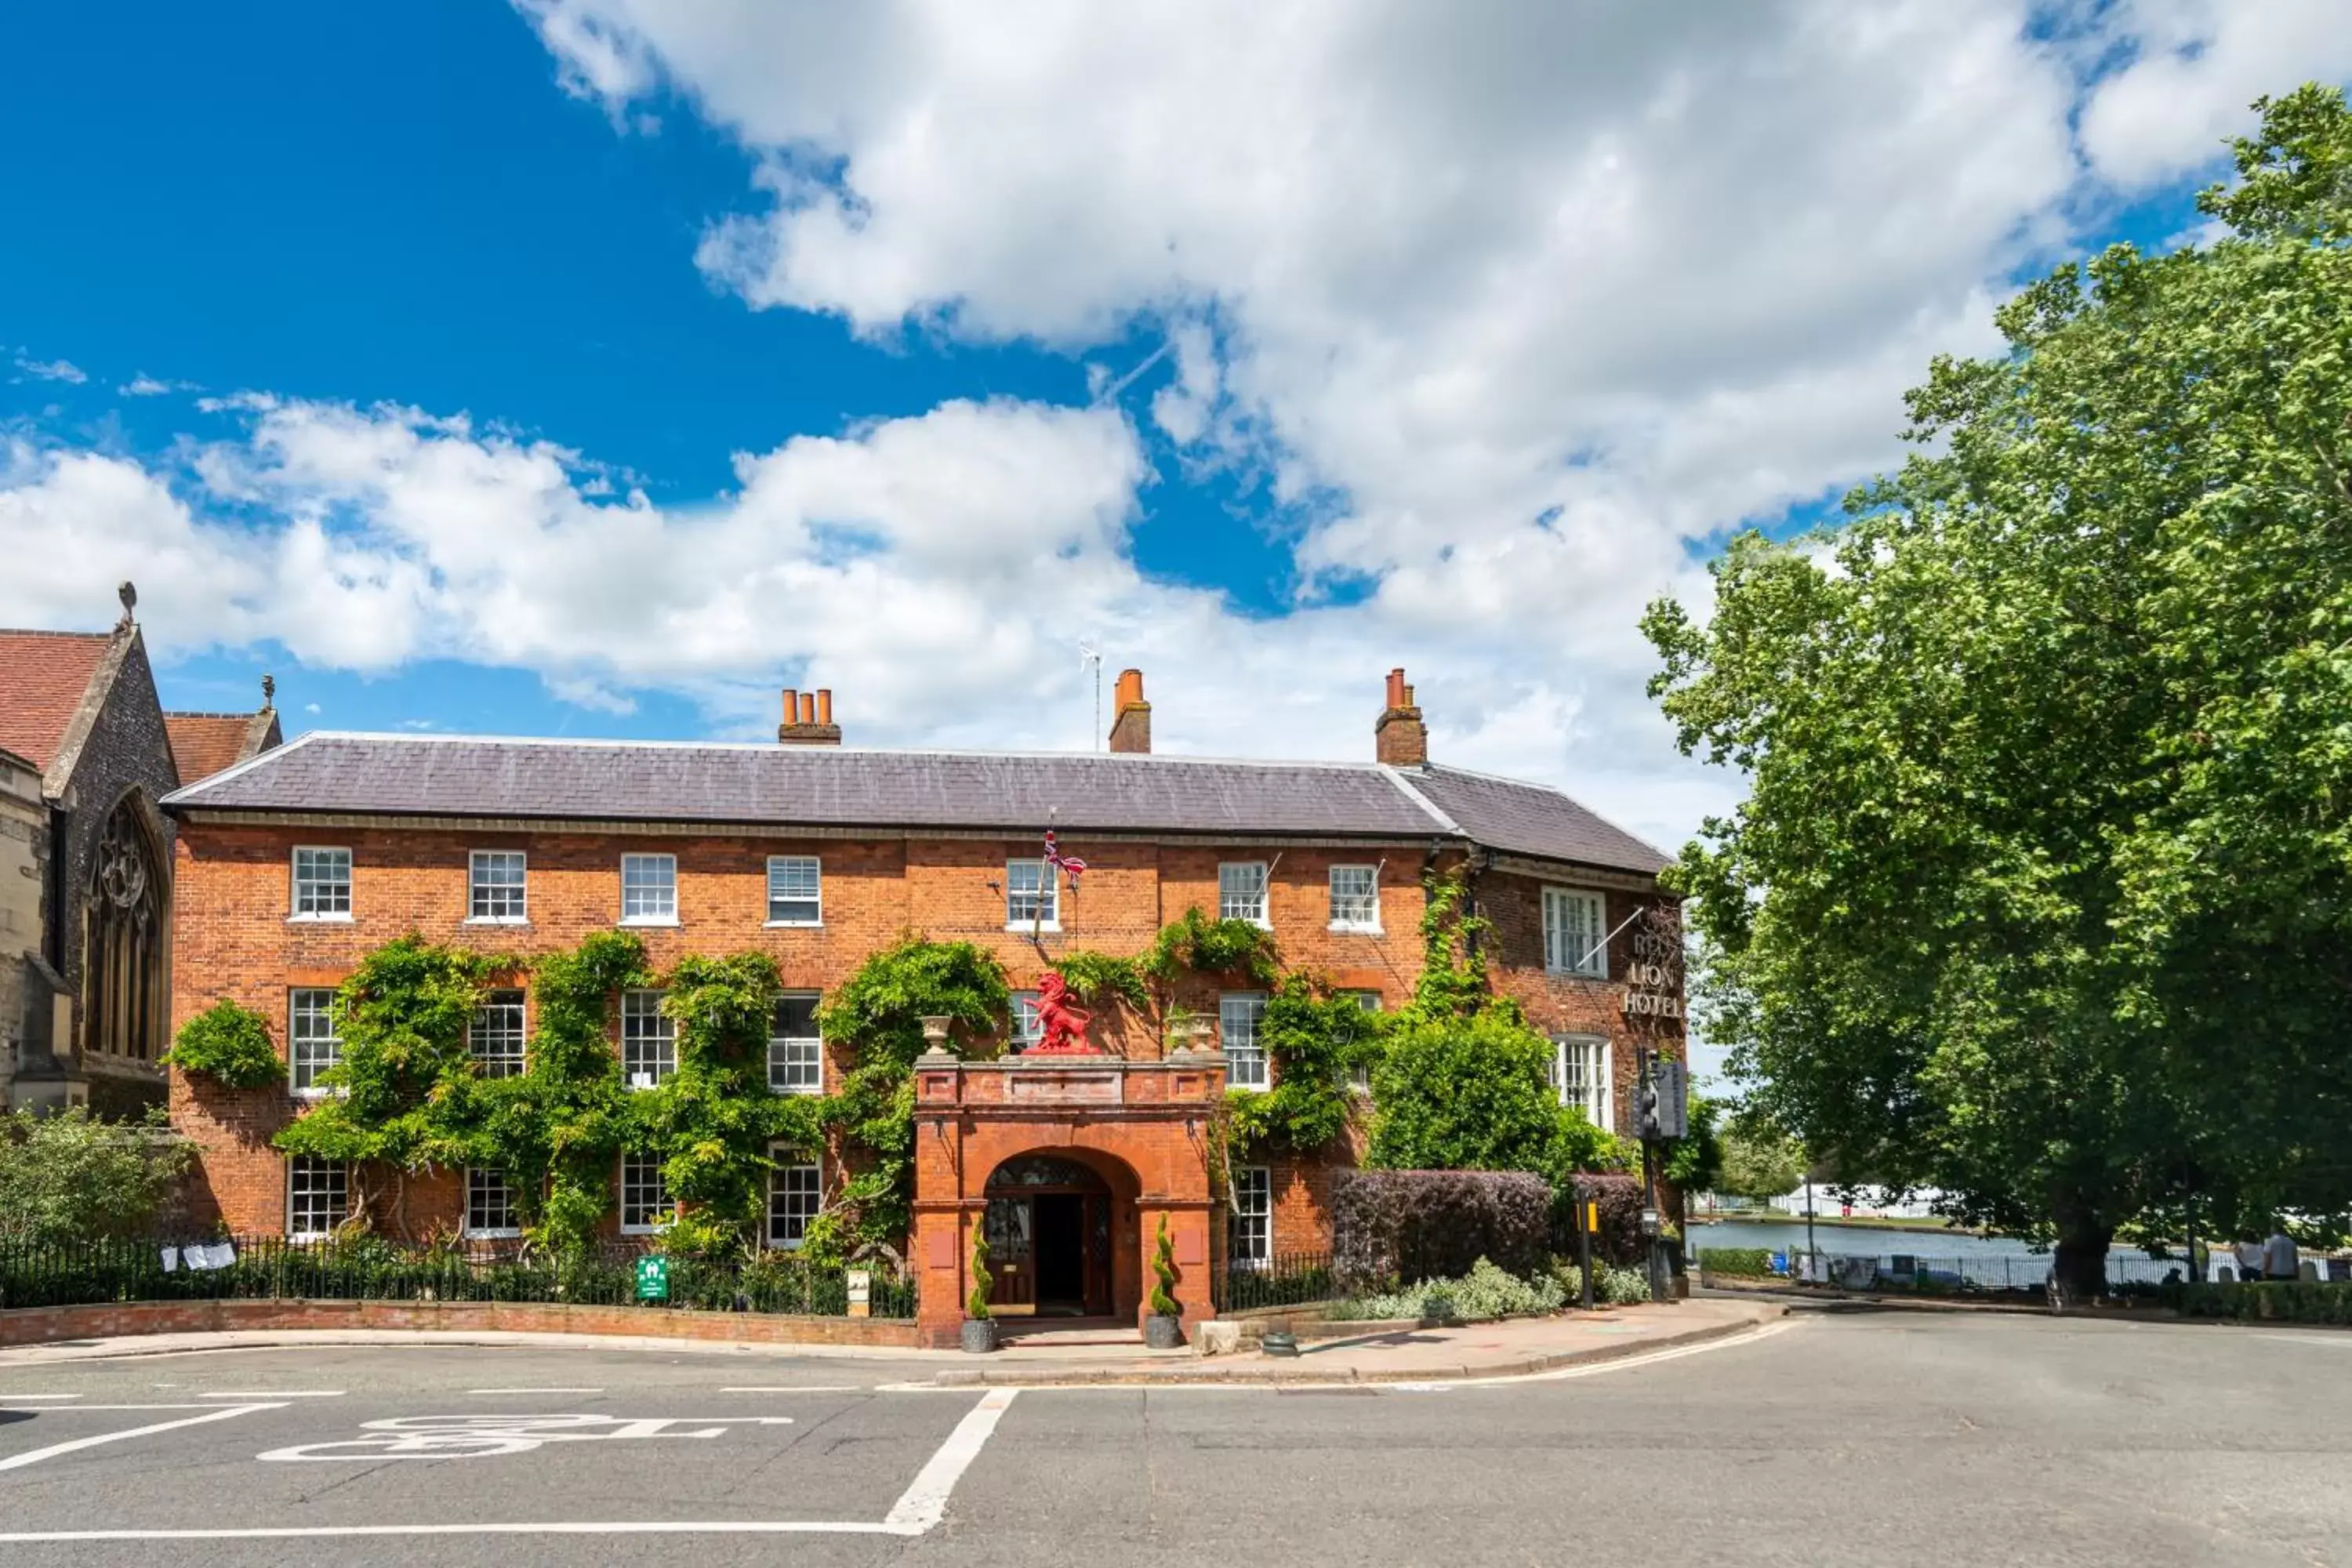 Property Building in The Relais Henley